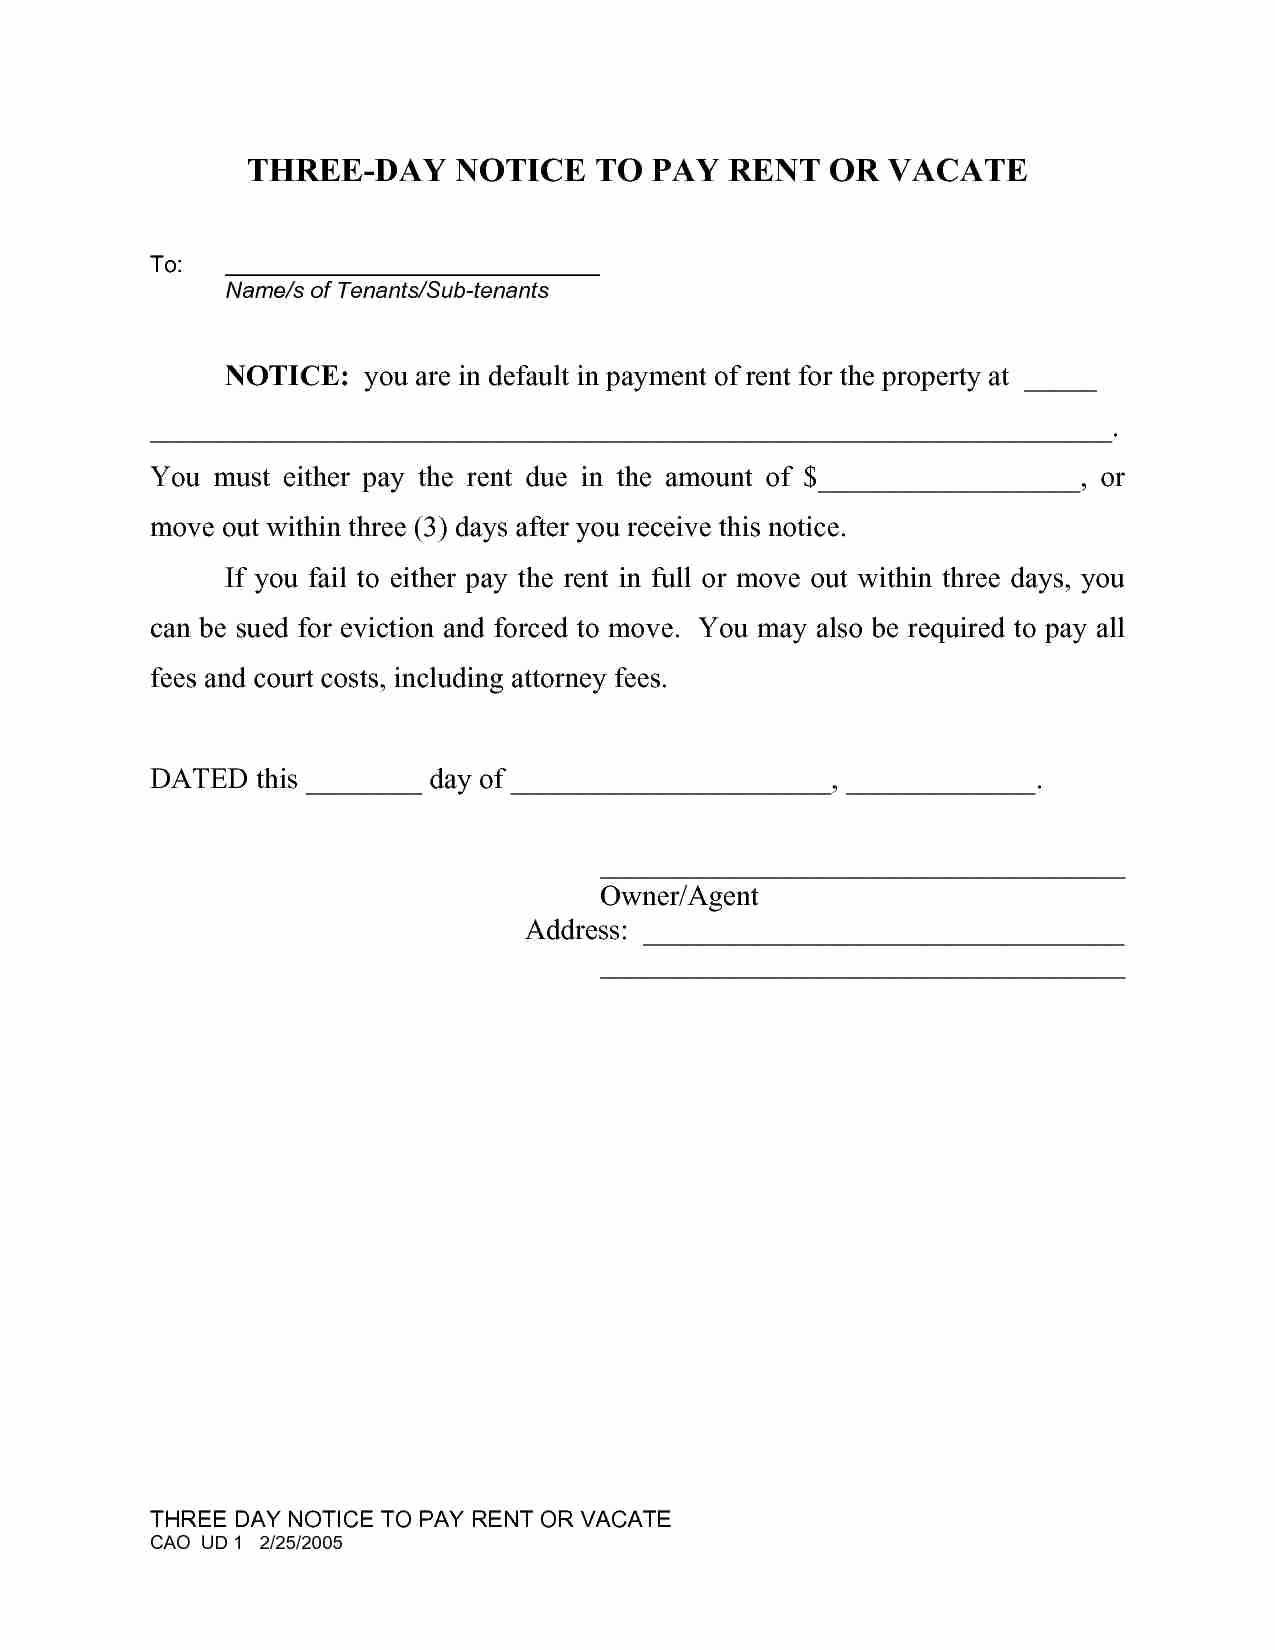 Lease Default Letter Template - 60 Day Notice to Vacate Template Inspirational Notice Default Letter